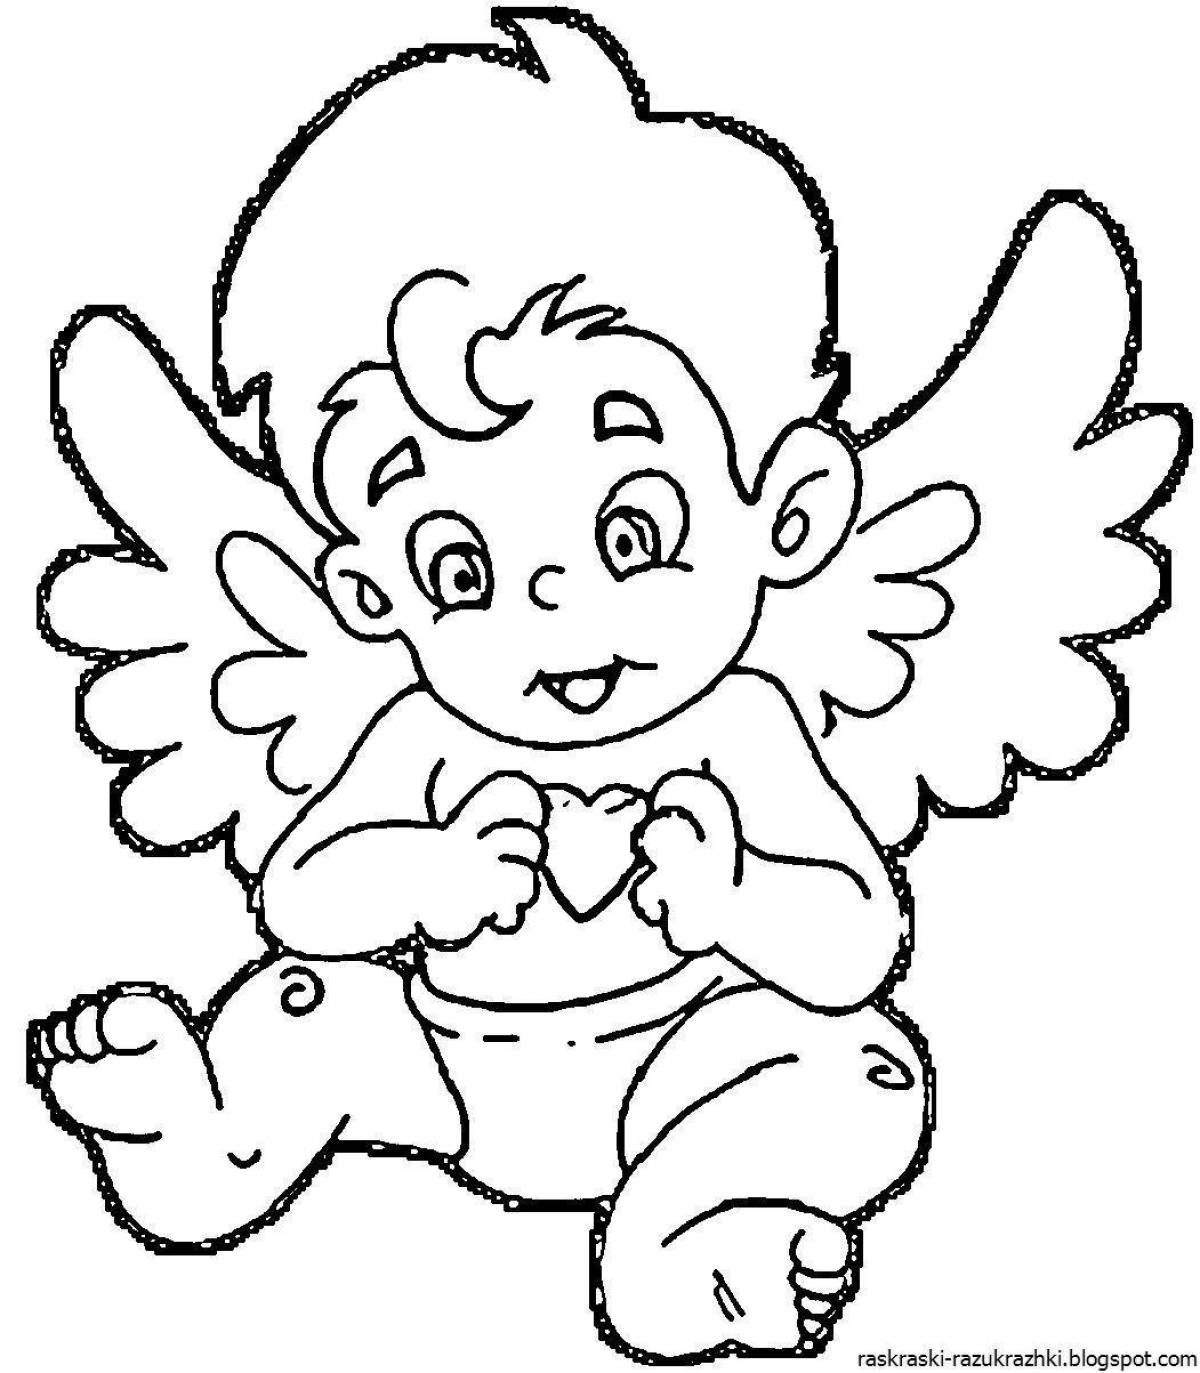 Sublime angel coloring book for kids